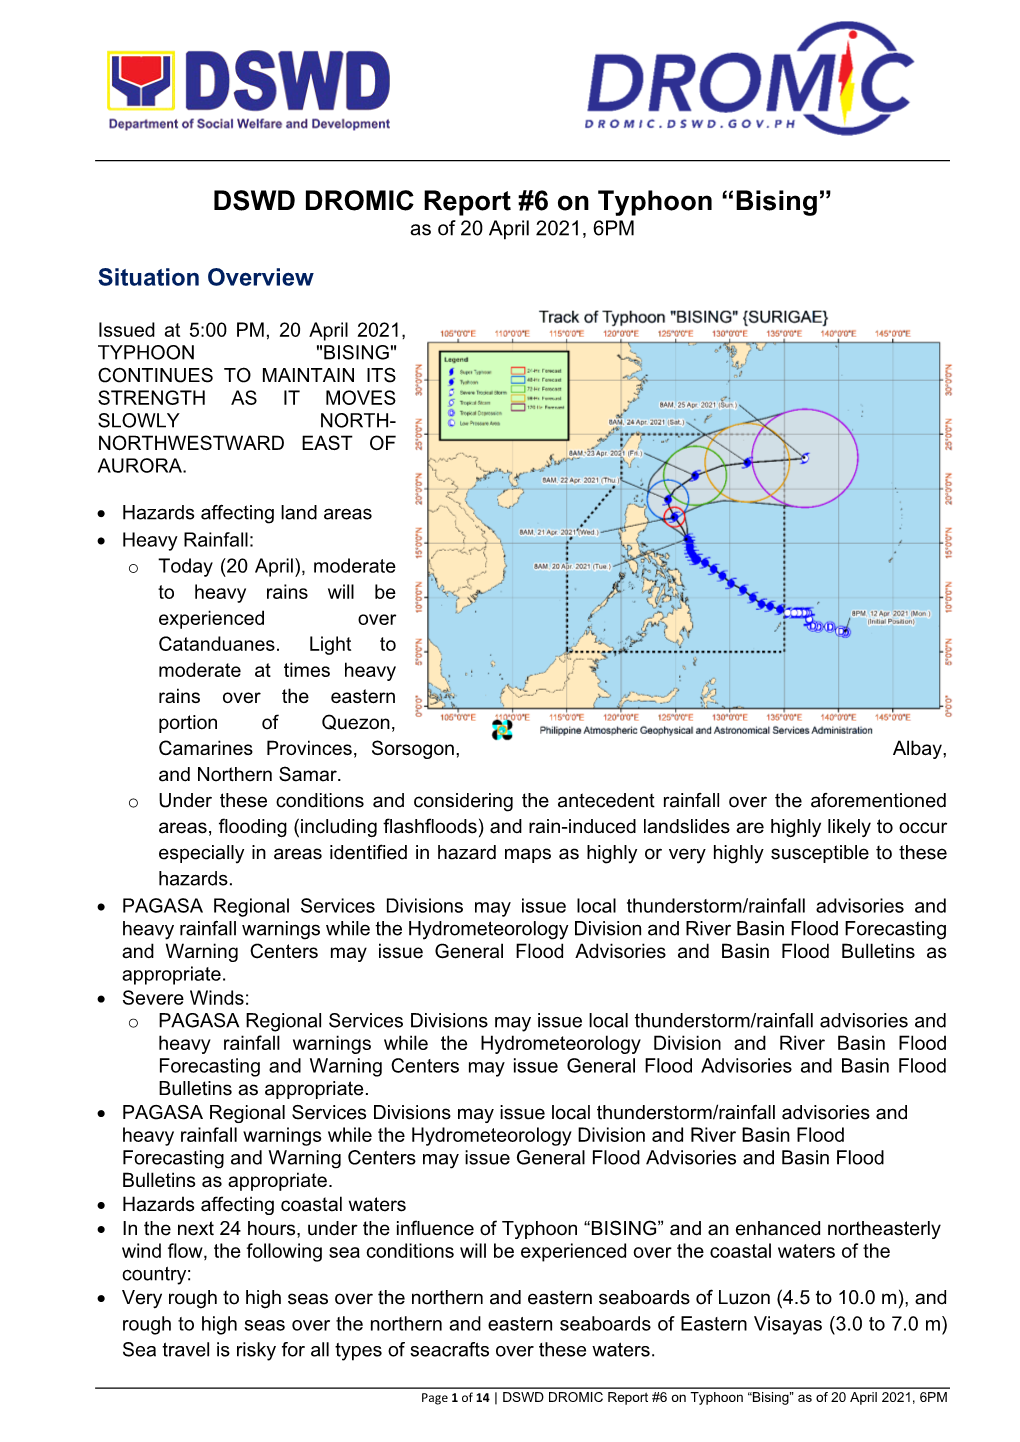 DSWD DROMIC Report #6 on Typhoon “Bising” As of 20 April 2021, 6PM